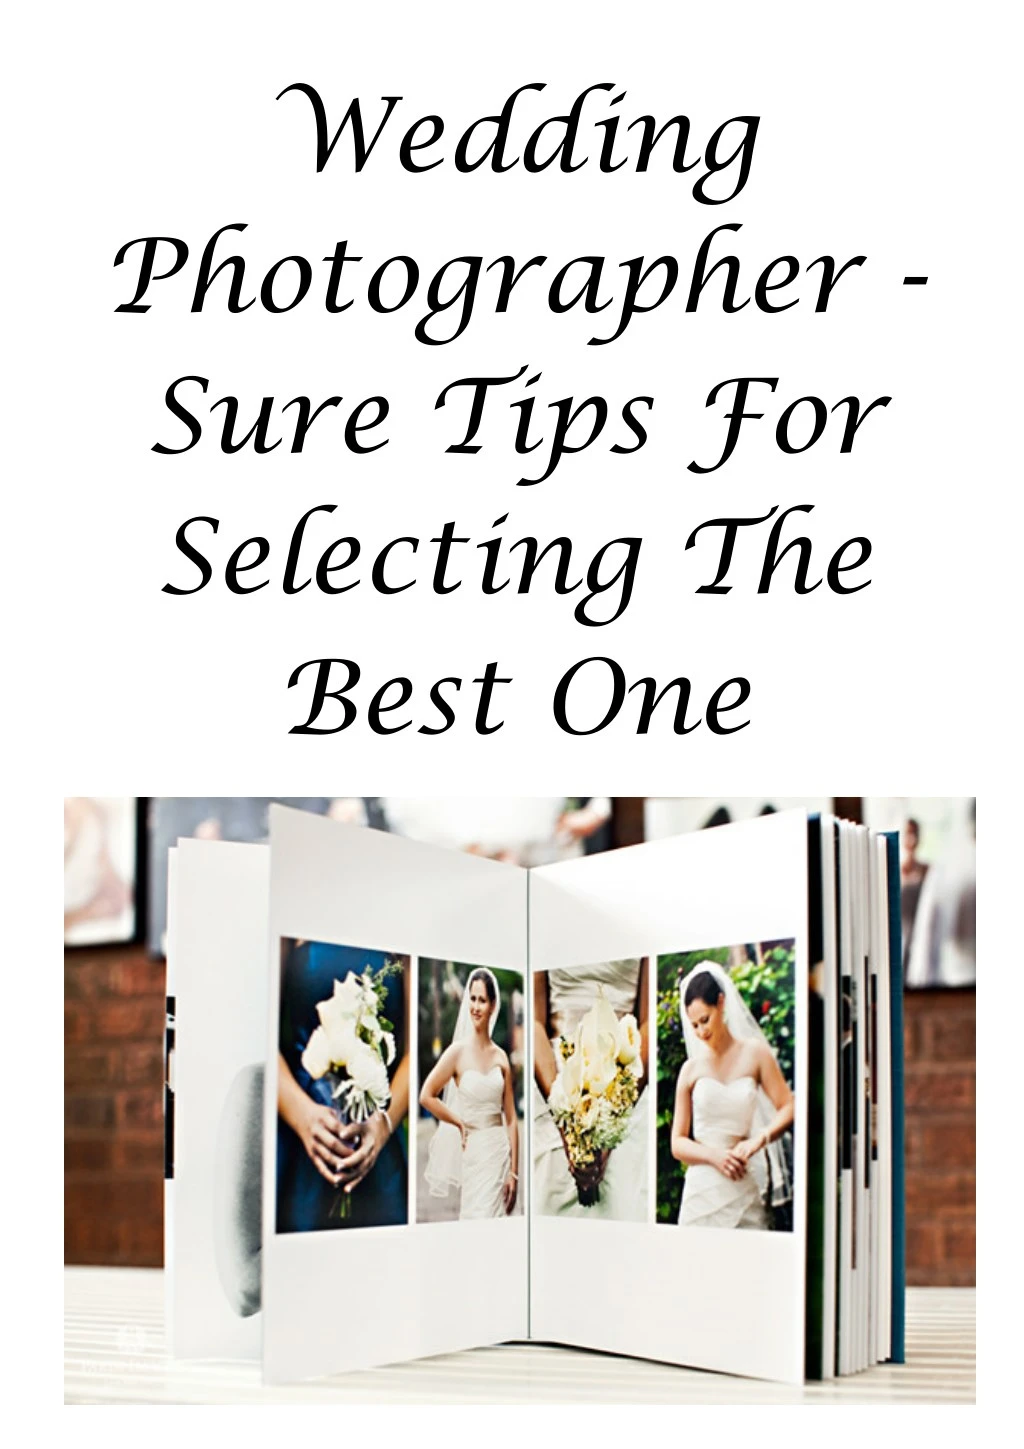 wedding photographer sure tips for selecting